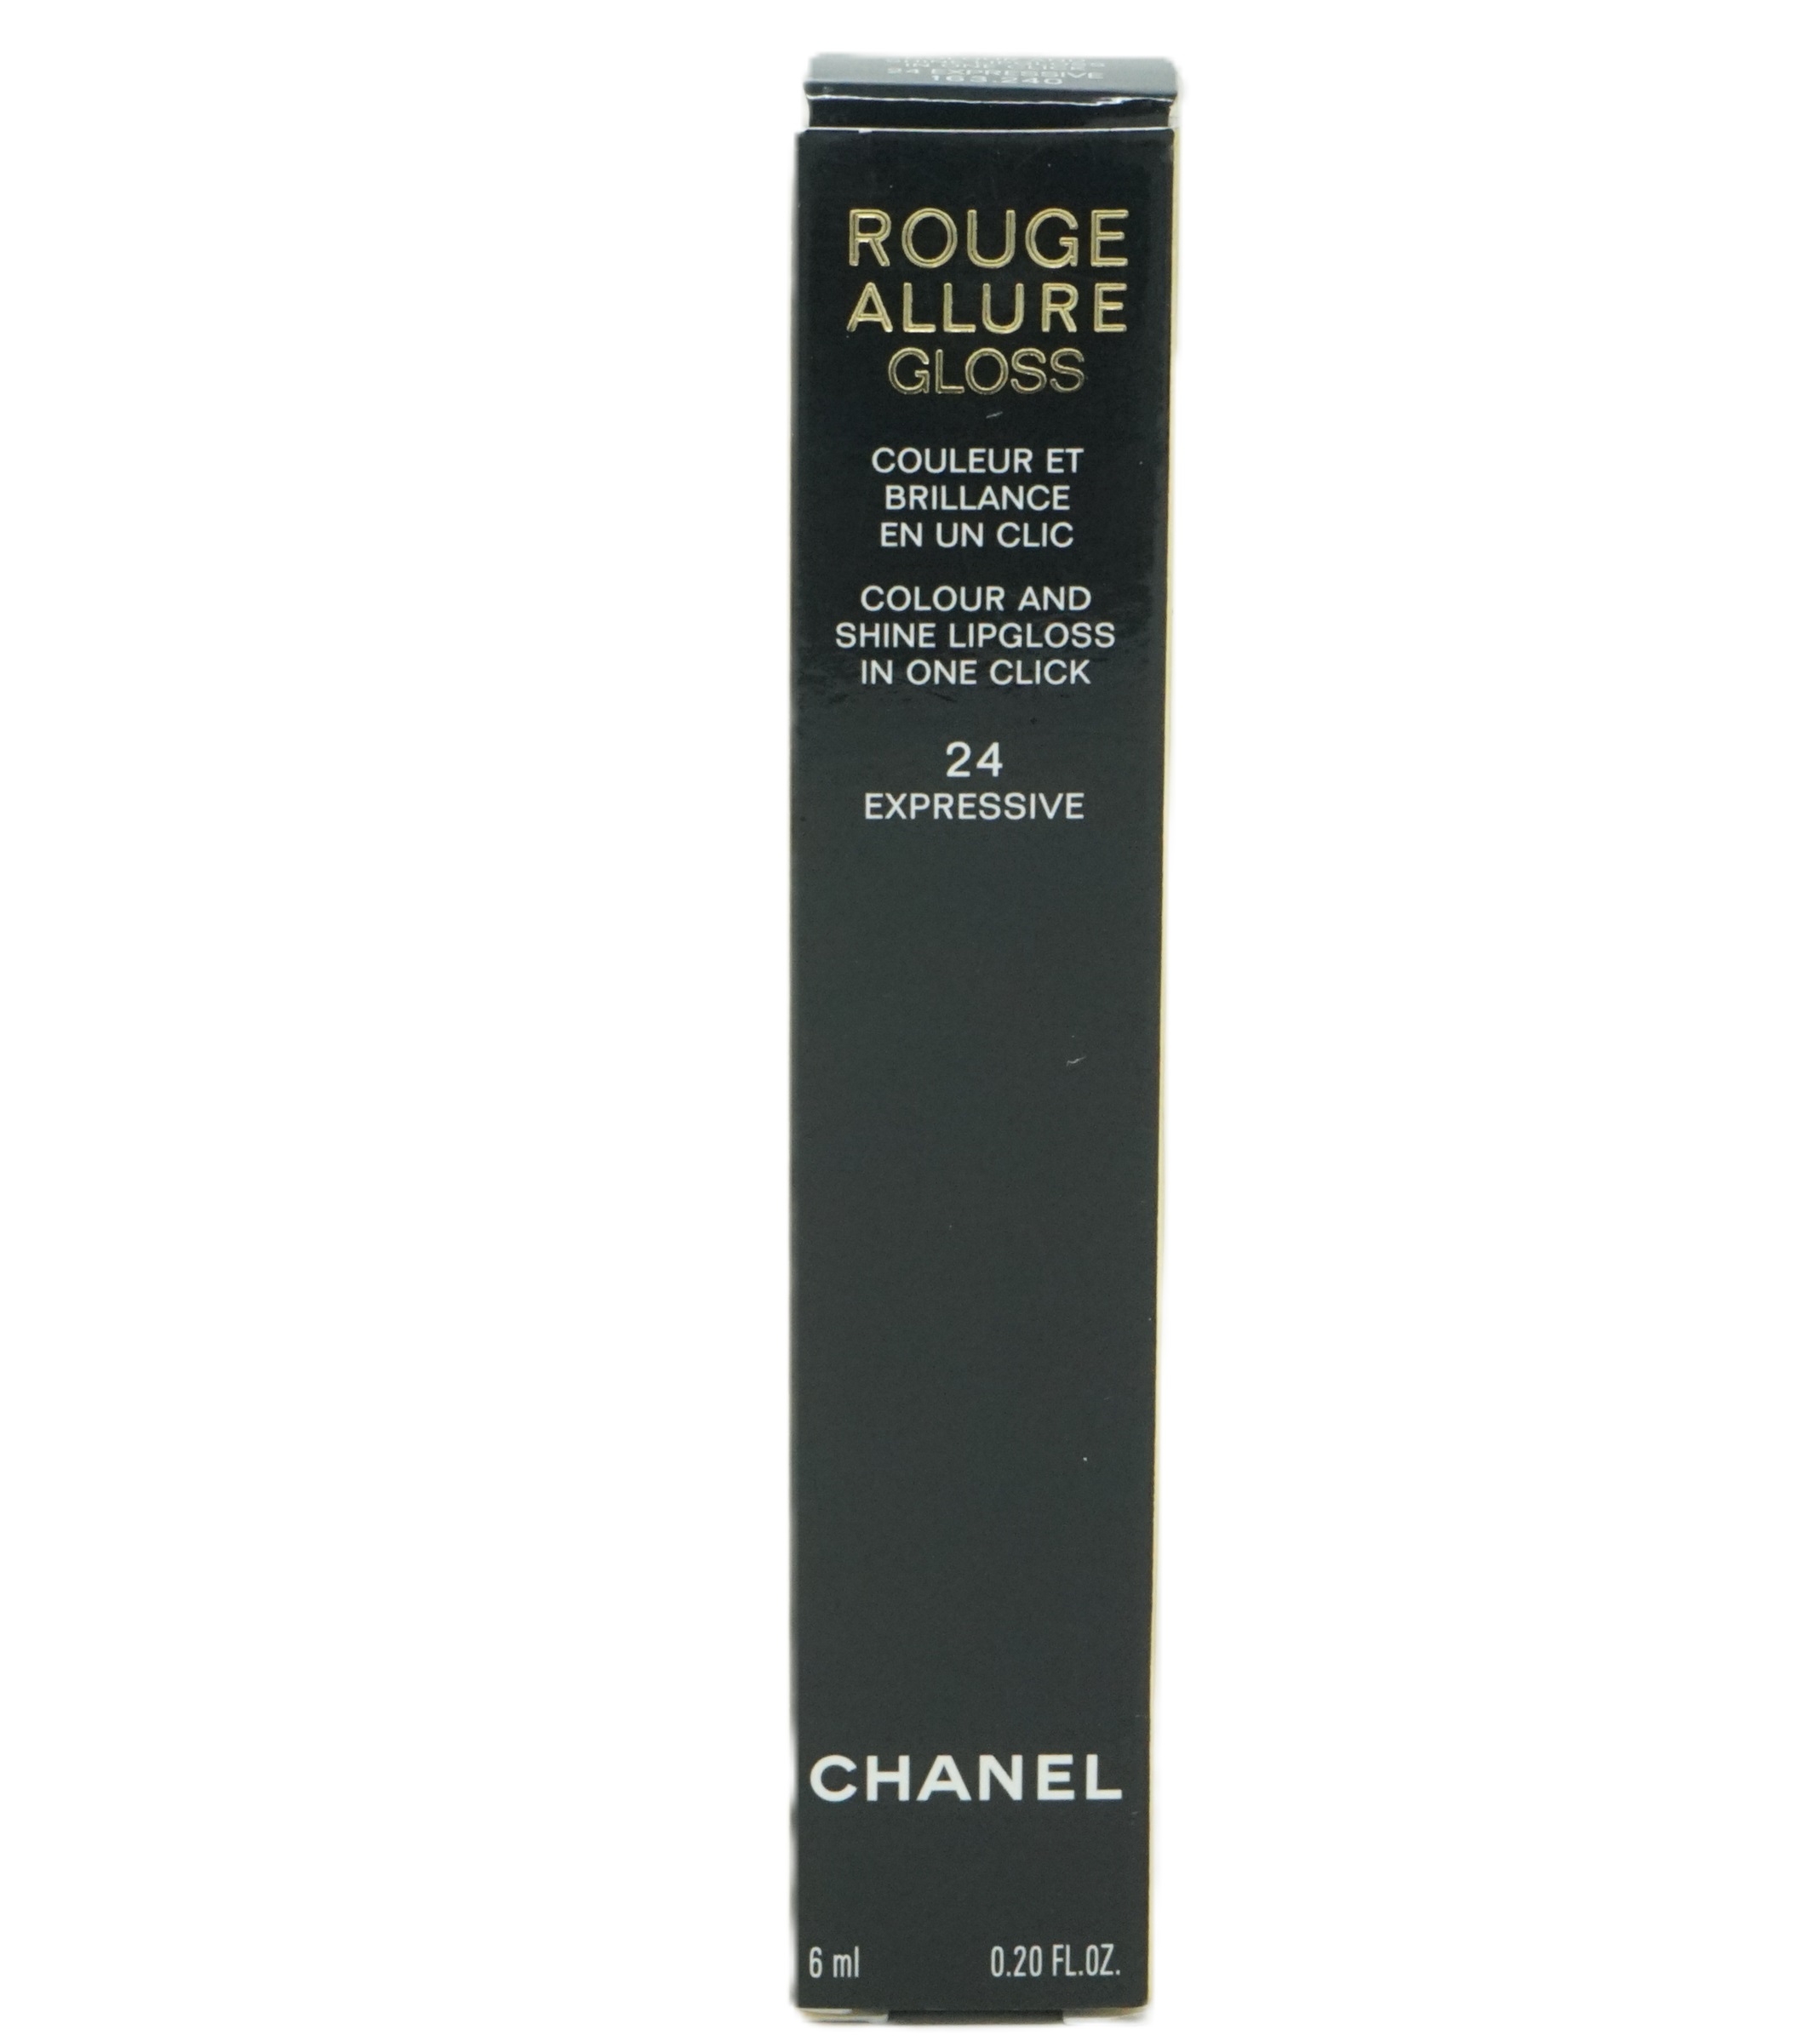 Chanel Rouge Allure Gloss 6ml Lipgloss 24 Expressive